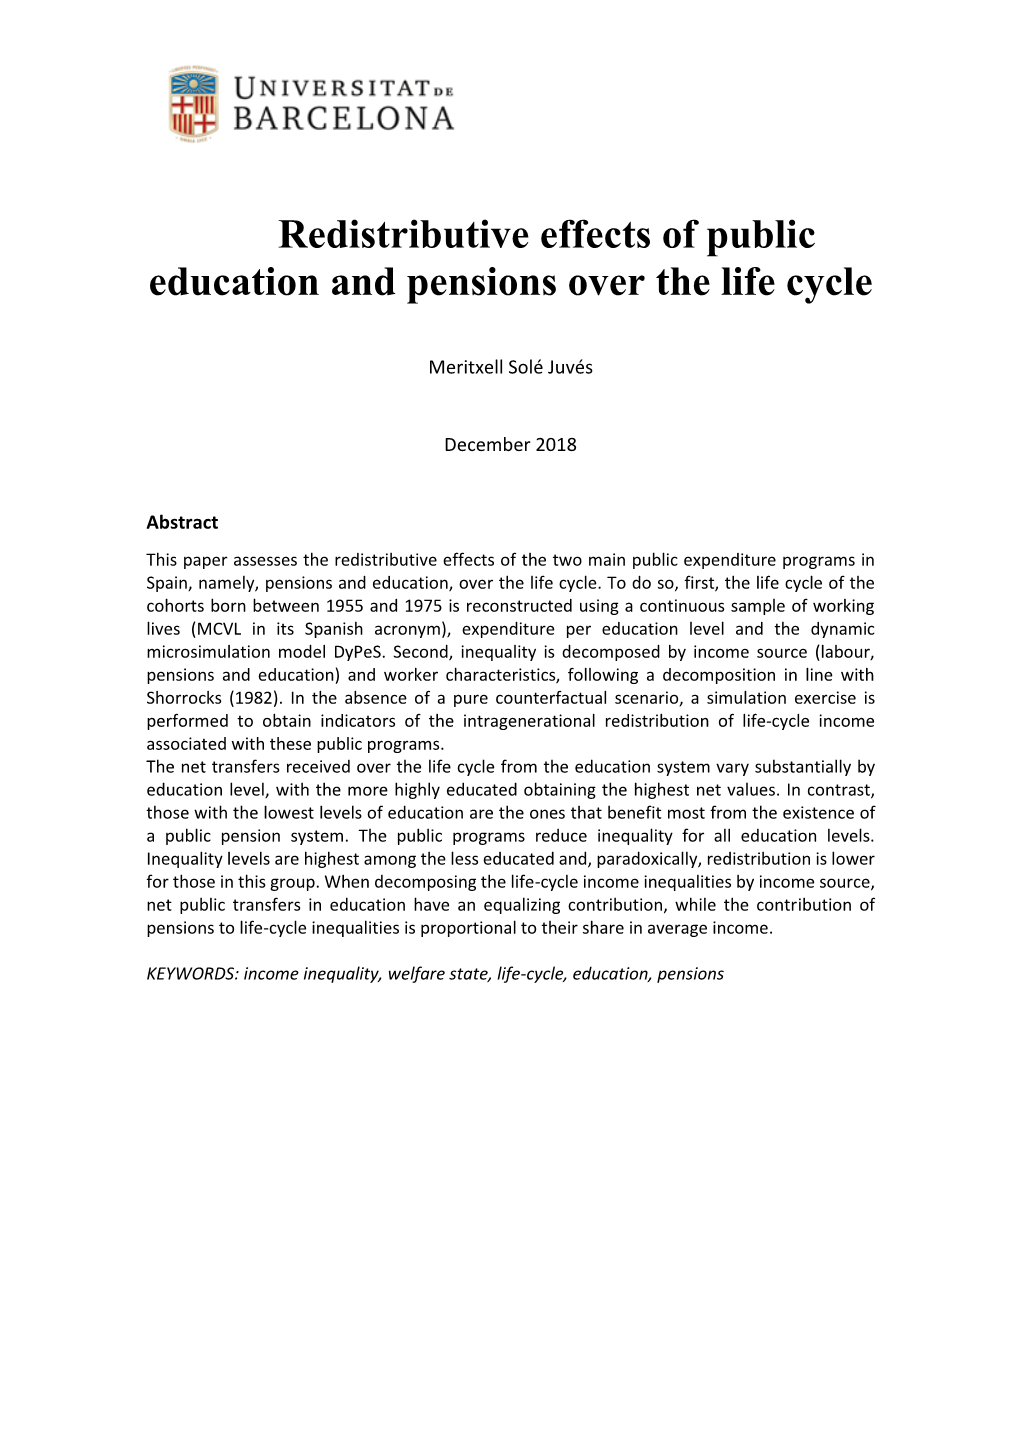 Redistributive Effects of Public Education and Pensions Over the Life Cycle